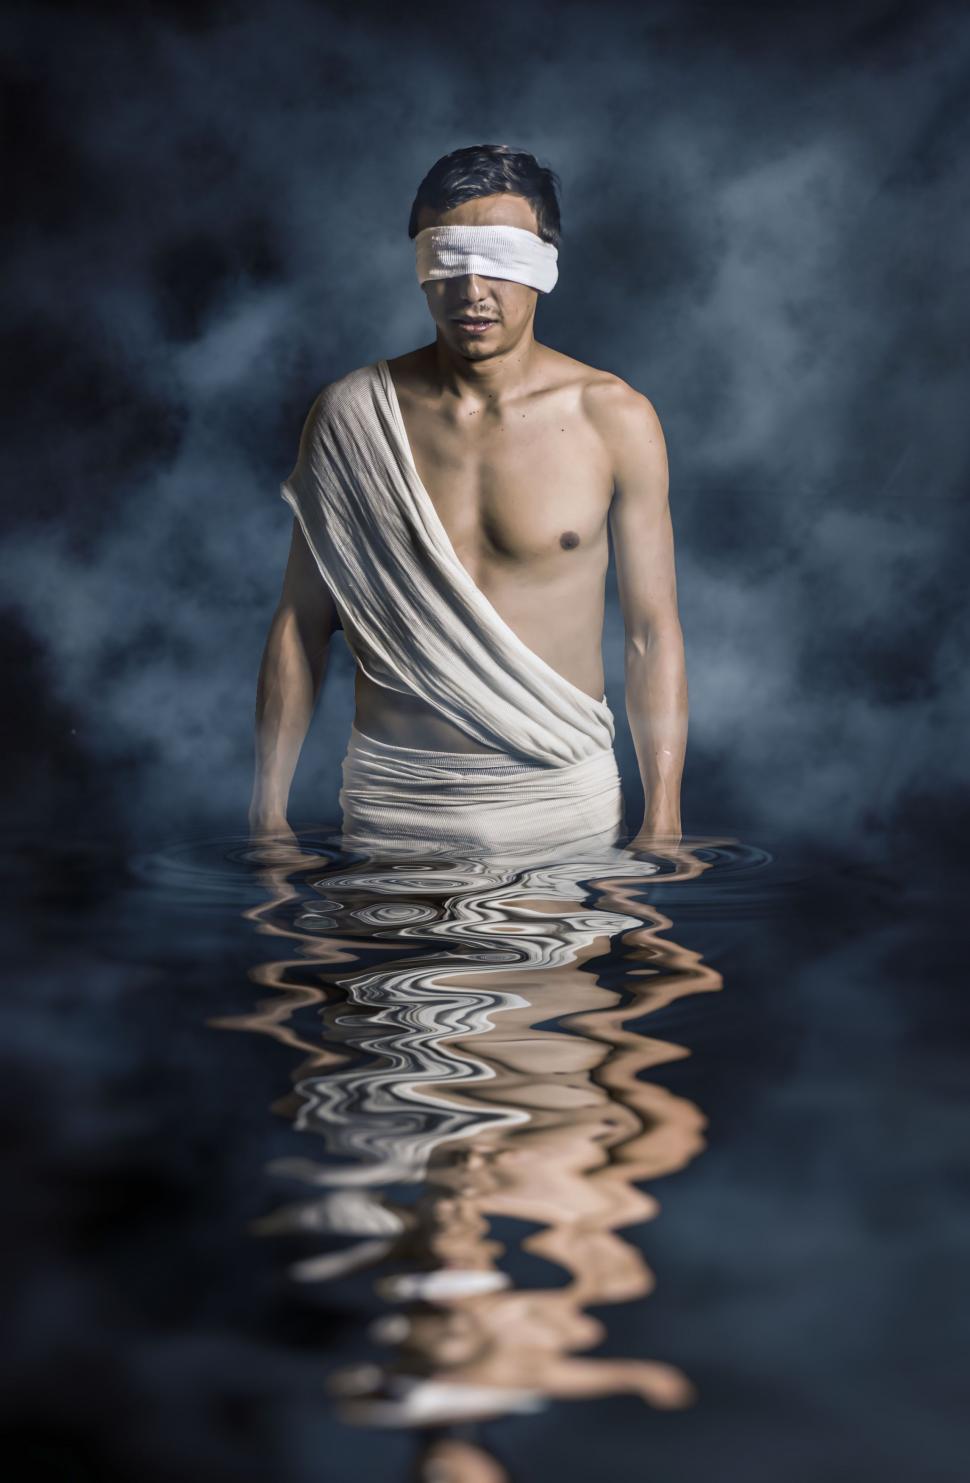 Free Stock Photo of Blindfolded Man Standing in Water